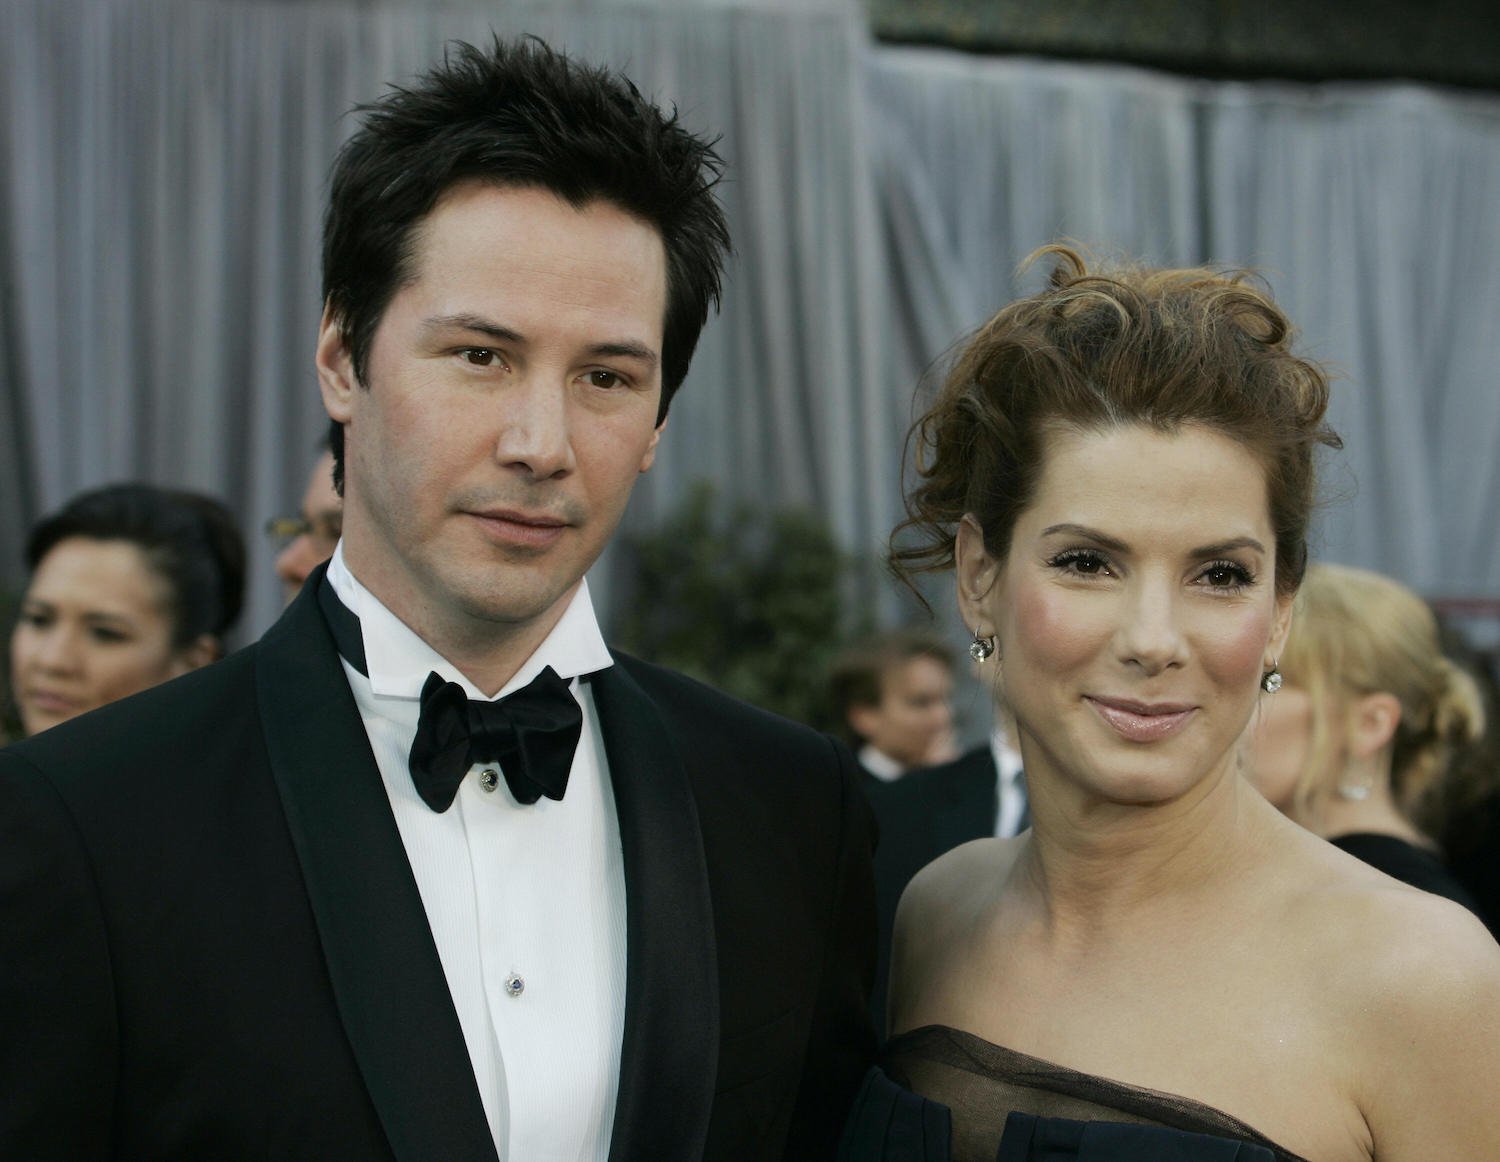 Keanu Reeves and Sandra Bullock arrive for the 78th Academy Awards